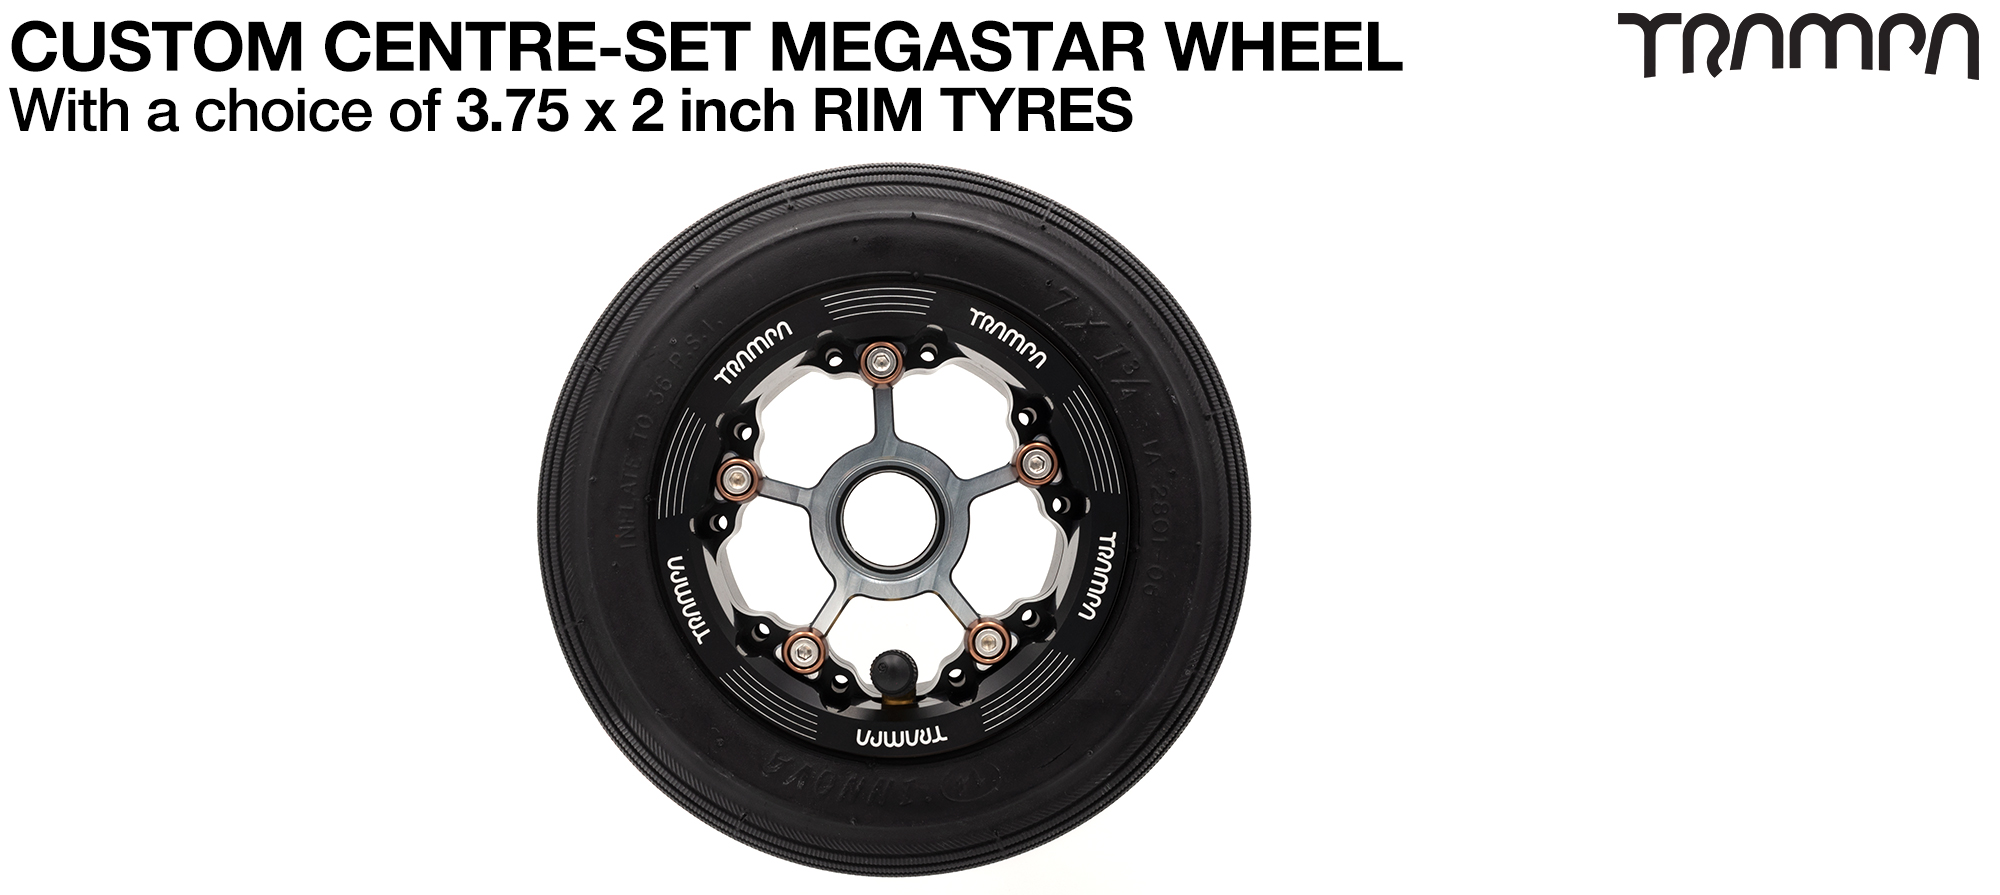 MEGASTAR 8 CENTRE-SET Wheels will fit any Tire TRAMPA offers up to 8 inches in Diameter 